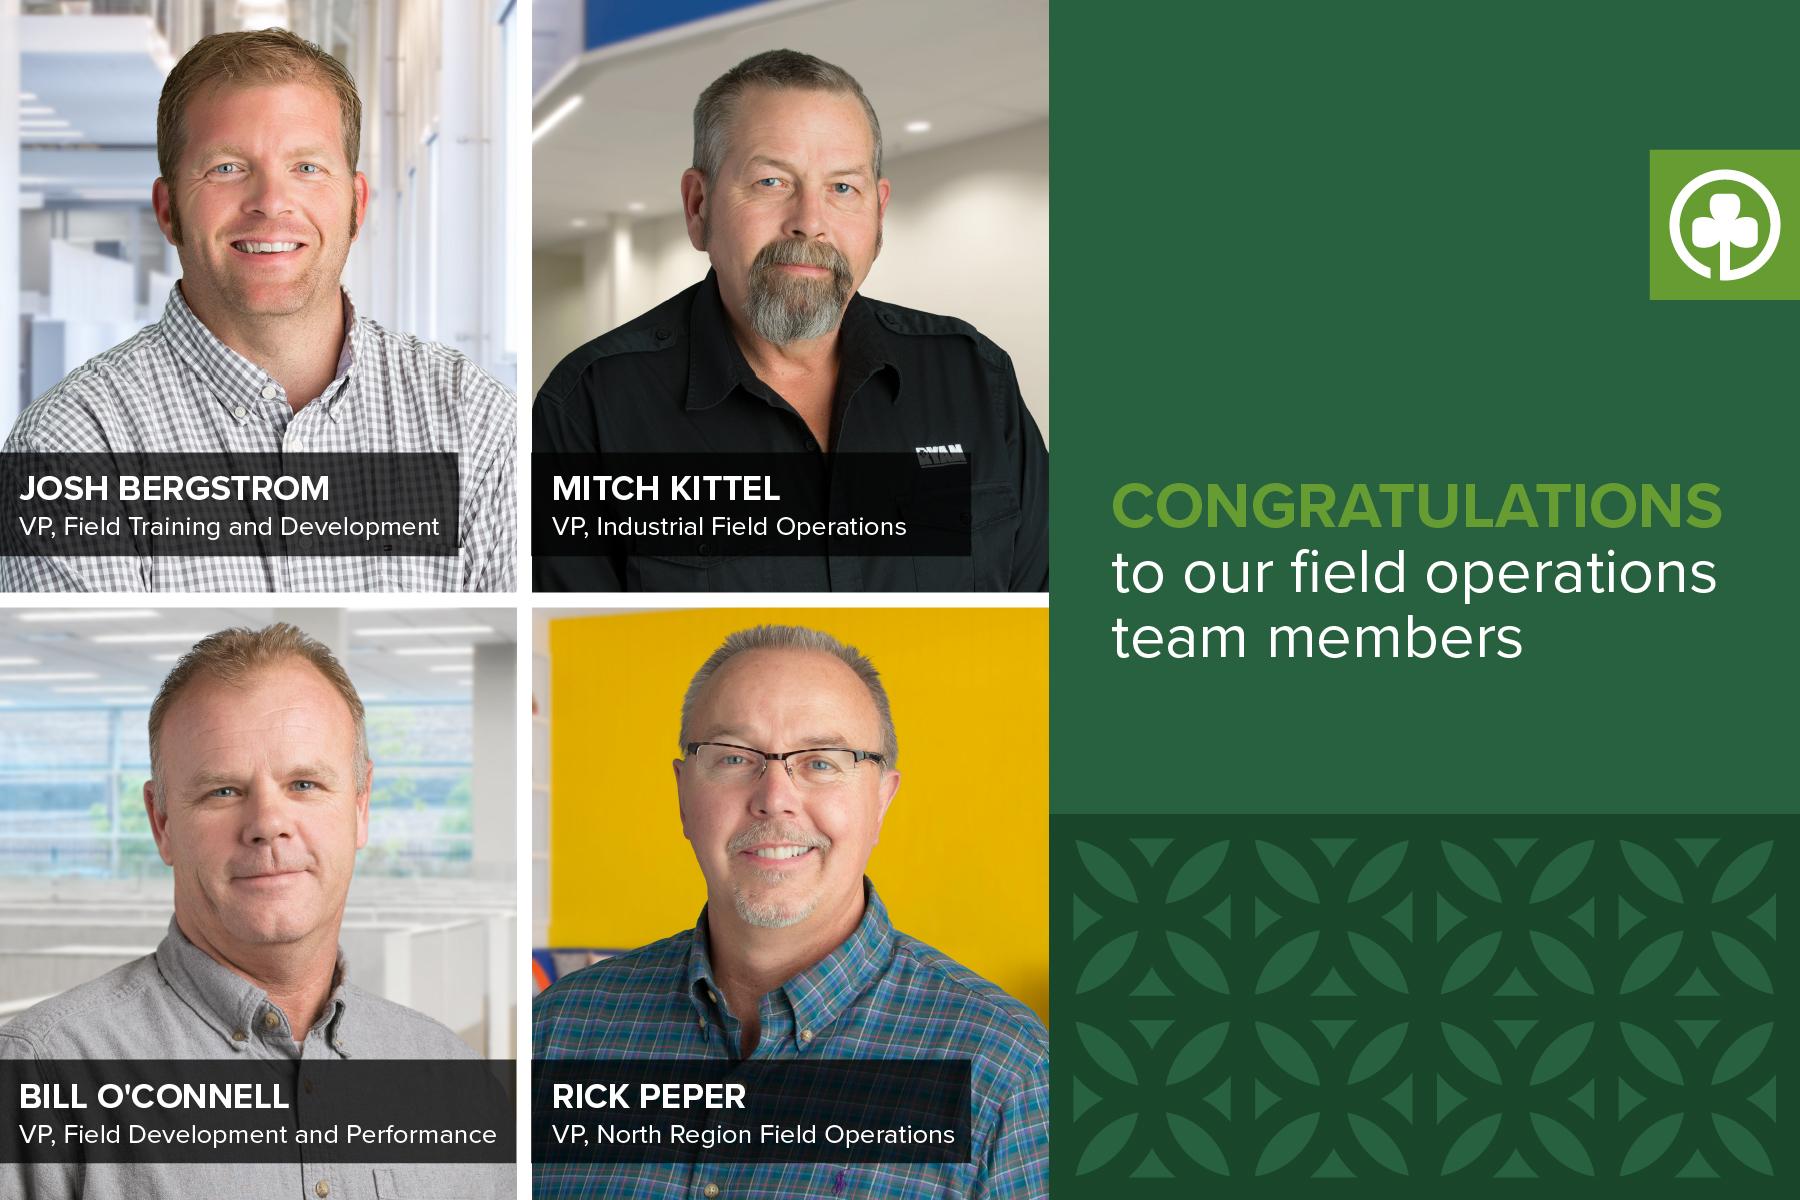 Four of Ryan's field operations team members were promoted to vice president.